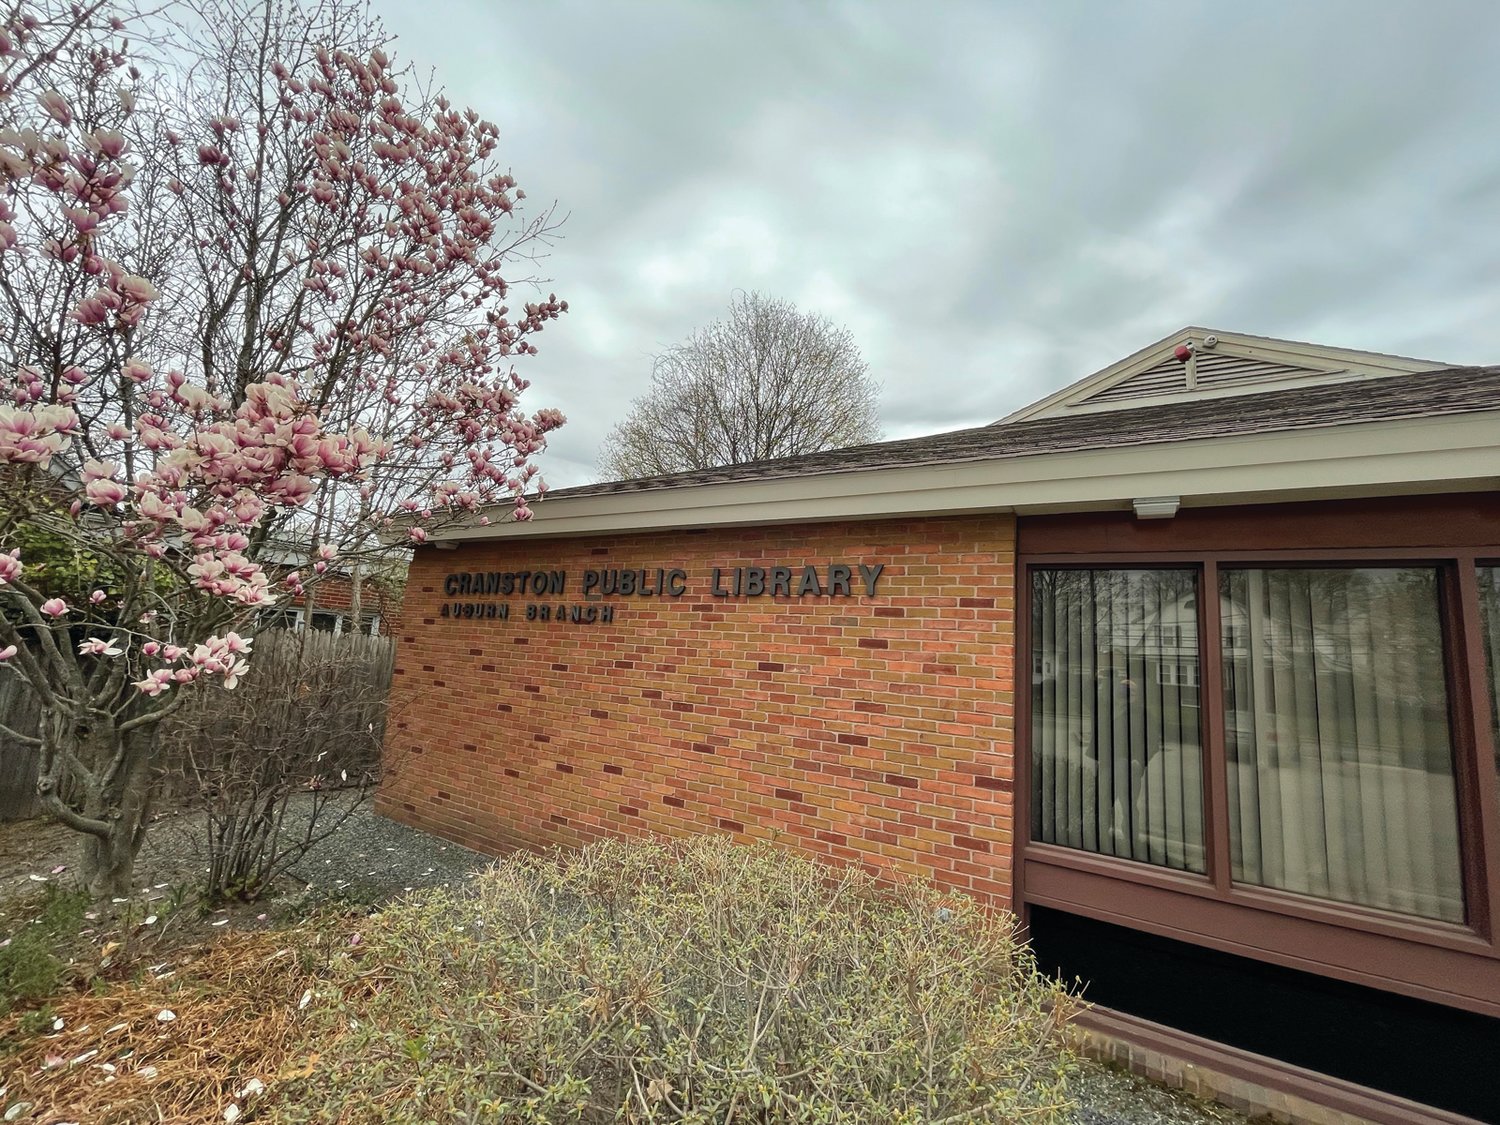 HOME FOR DECADES: The Auburn Branch of the Cranston Public Library has roots dating back to 1888. It occupied a number of locations during its first 100 years before its permanent home at 396 Pontiac Ave. opened in 1991.